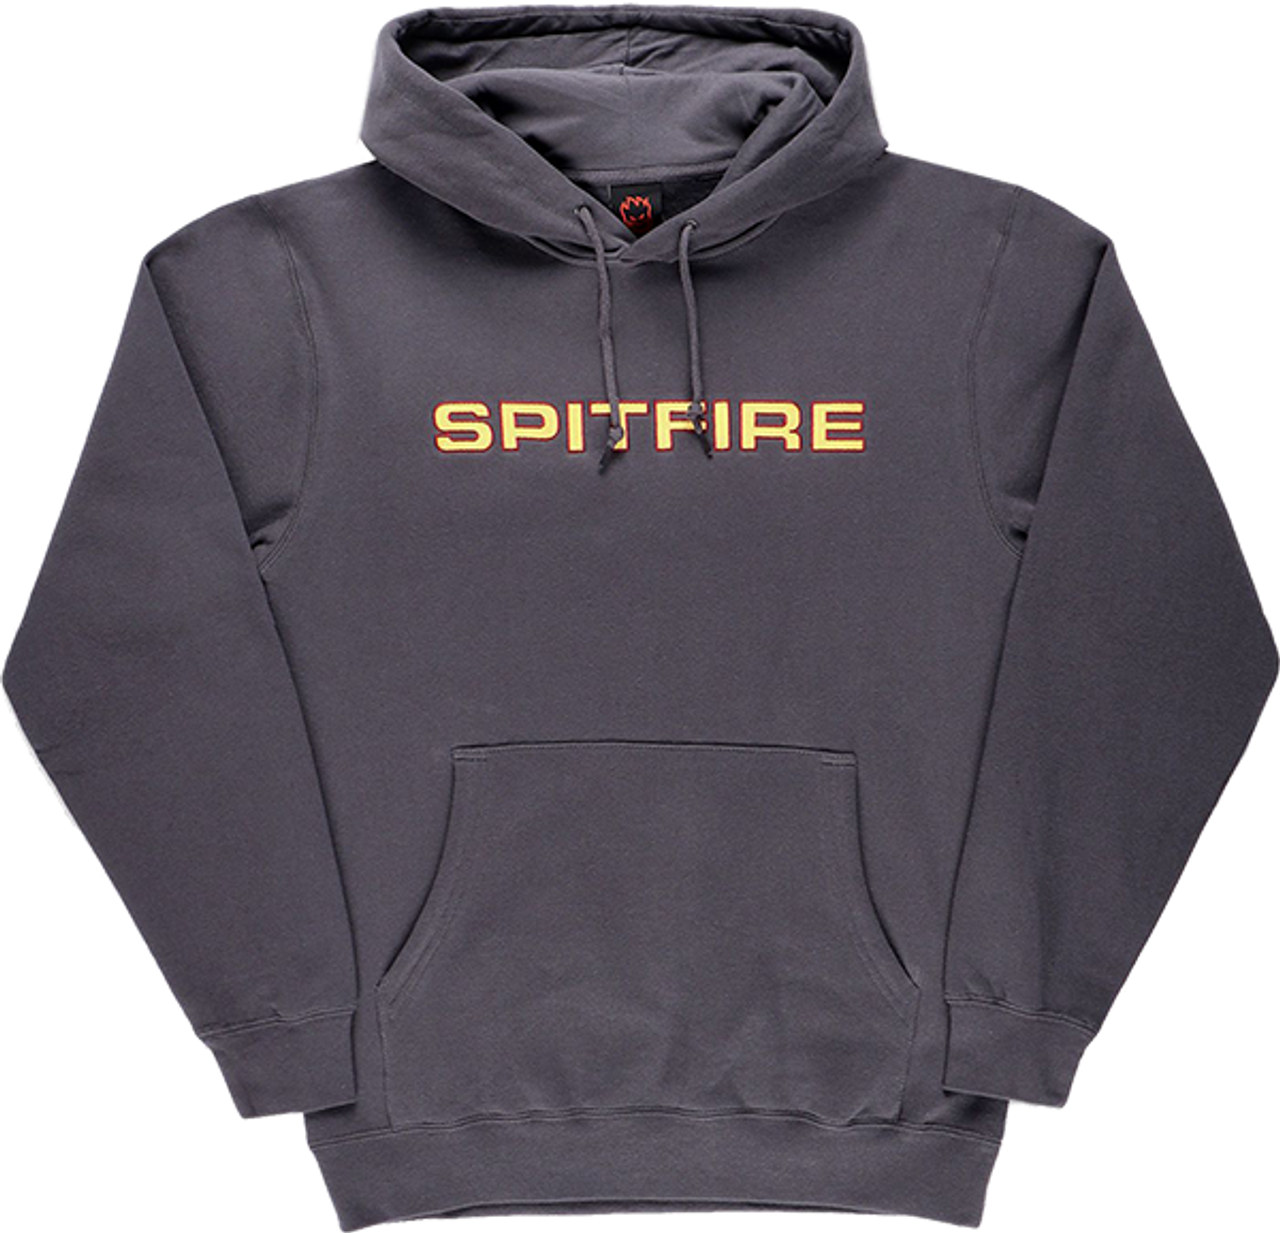 SPITFIRE CLASSIC 87 EMB HOODIE SWEATSHIRT LARGE  CHARCOAL/RED/GOLD